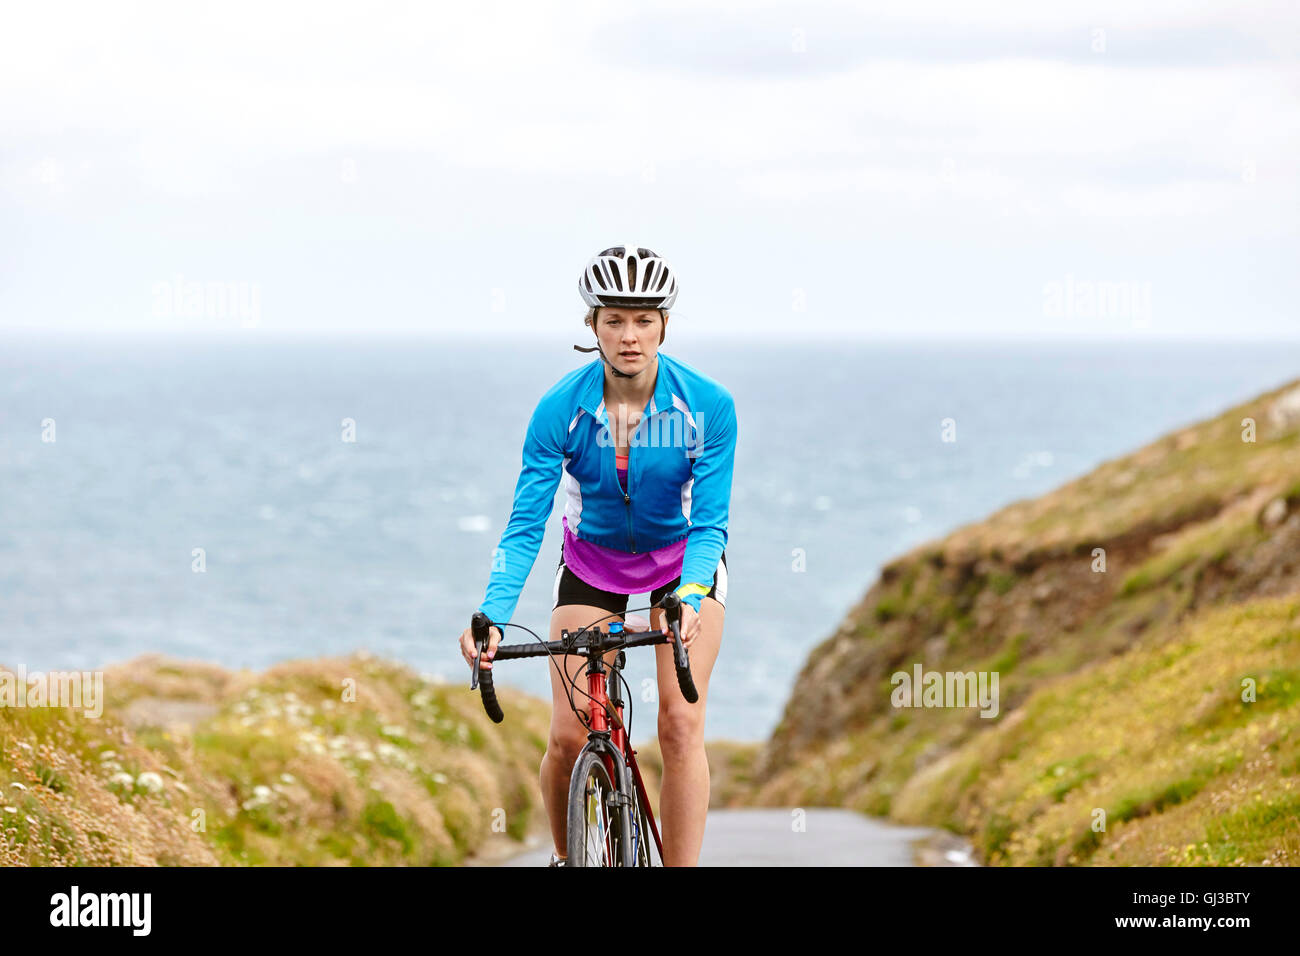 Cyclist riding on road overlooking ocean Stock Photo